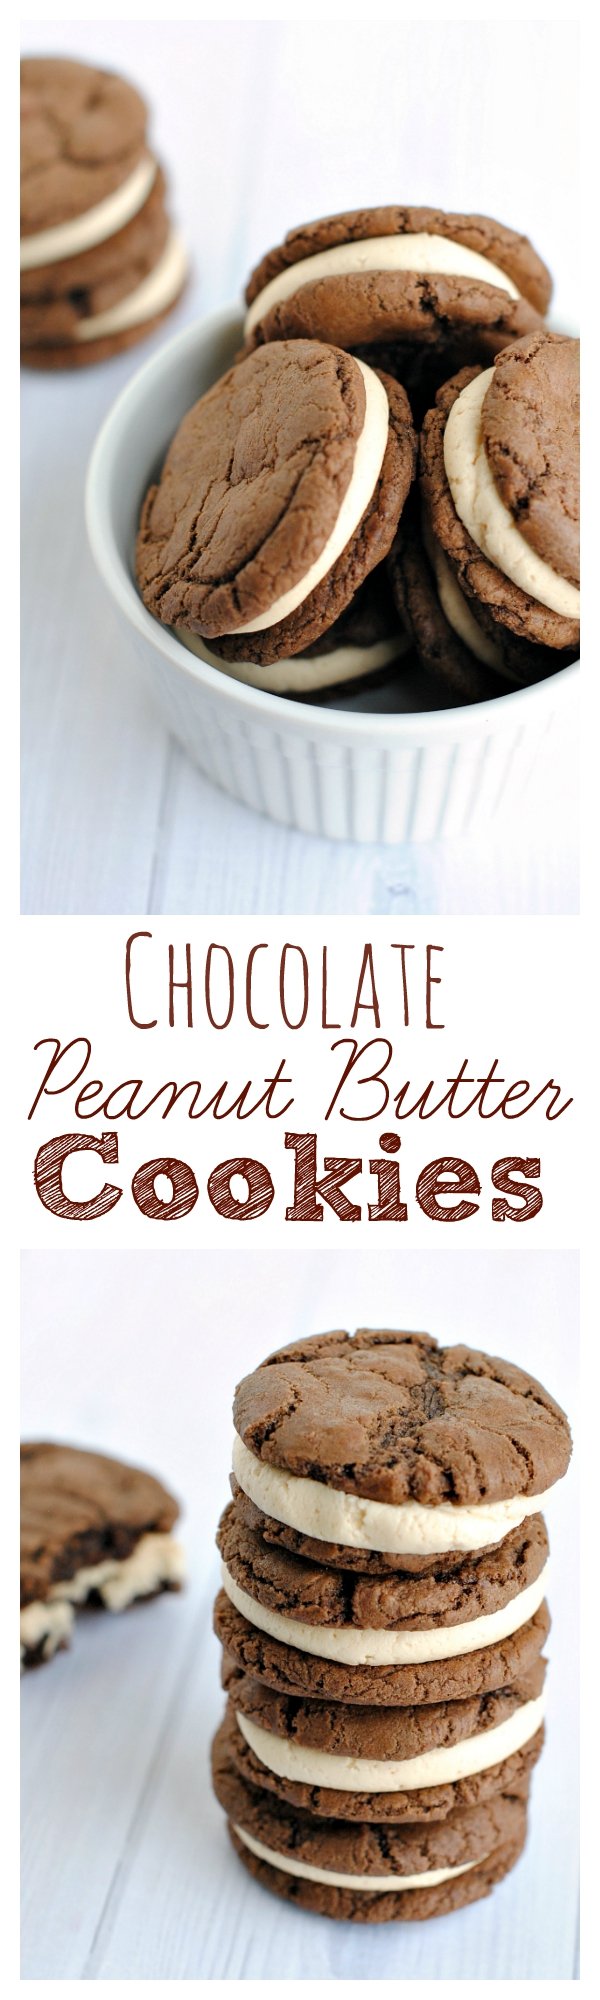 Amazing Chocolate and Peanut Butter Sandwich Cookies! 